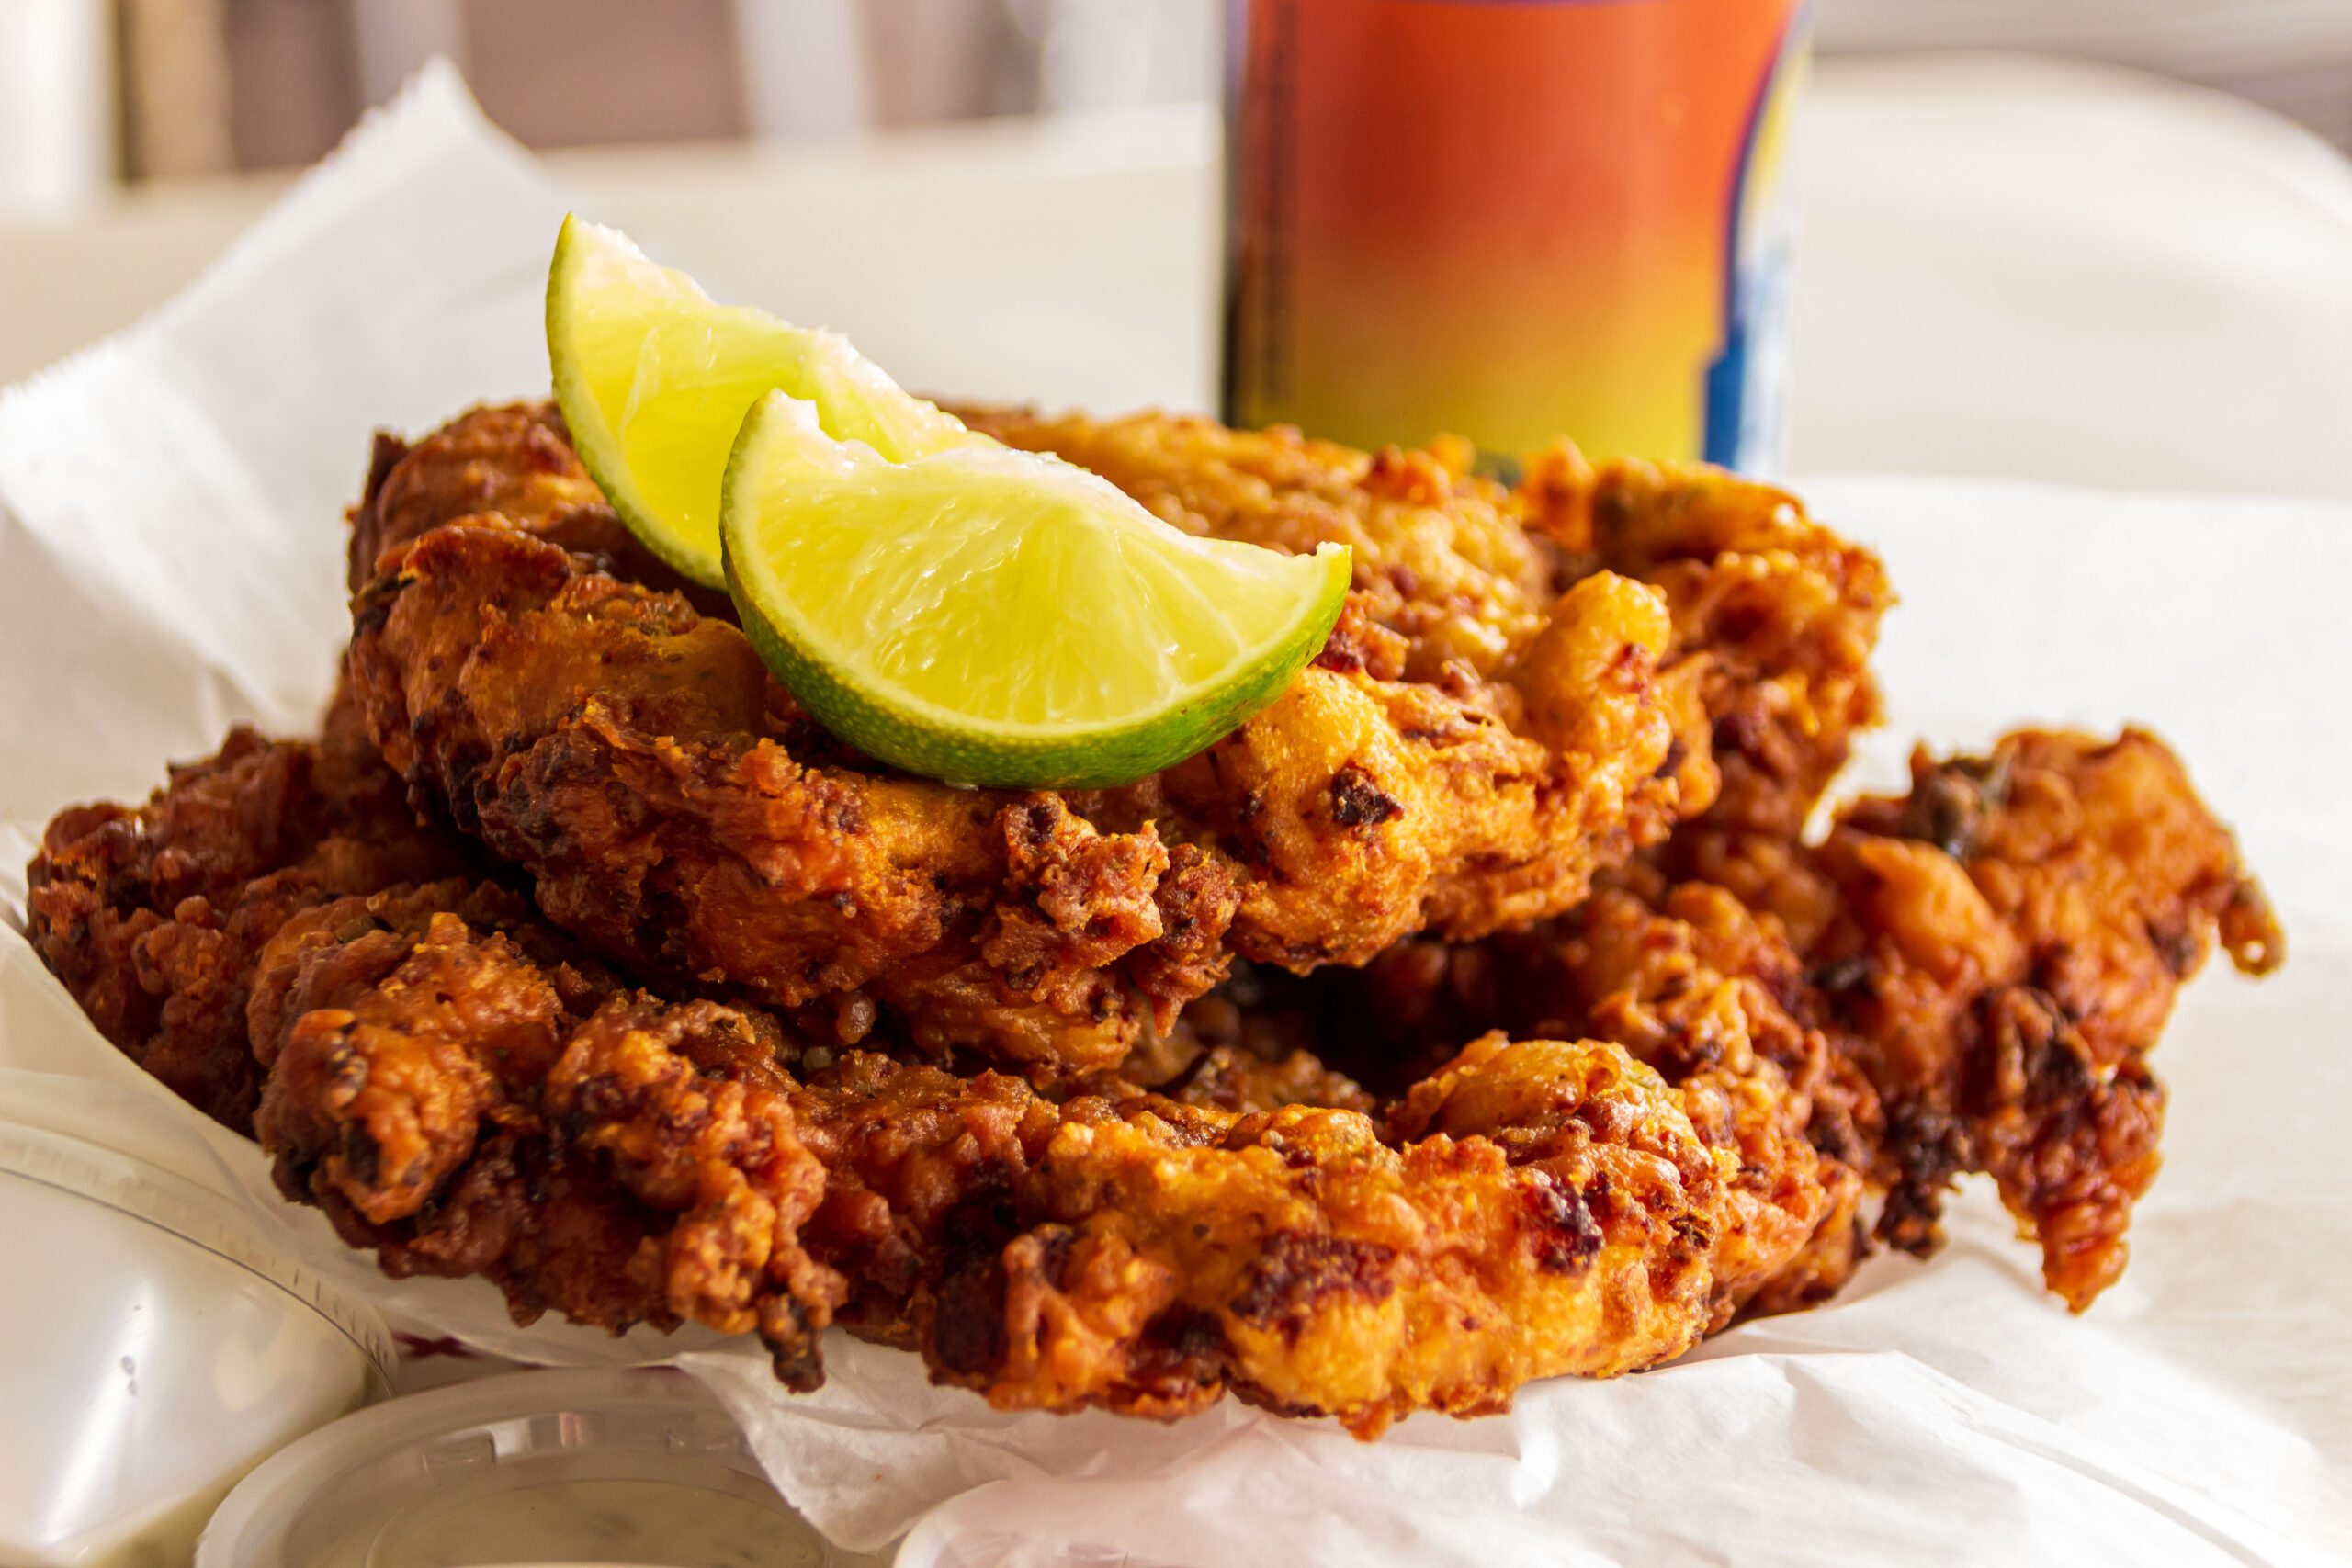 Conch fritters, a popular appetizer in the British Virgin Islands